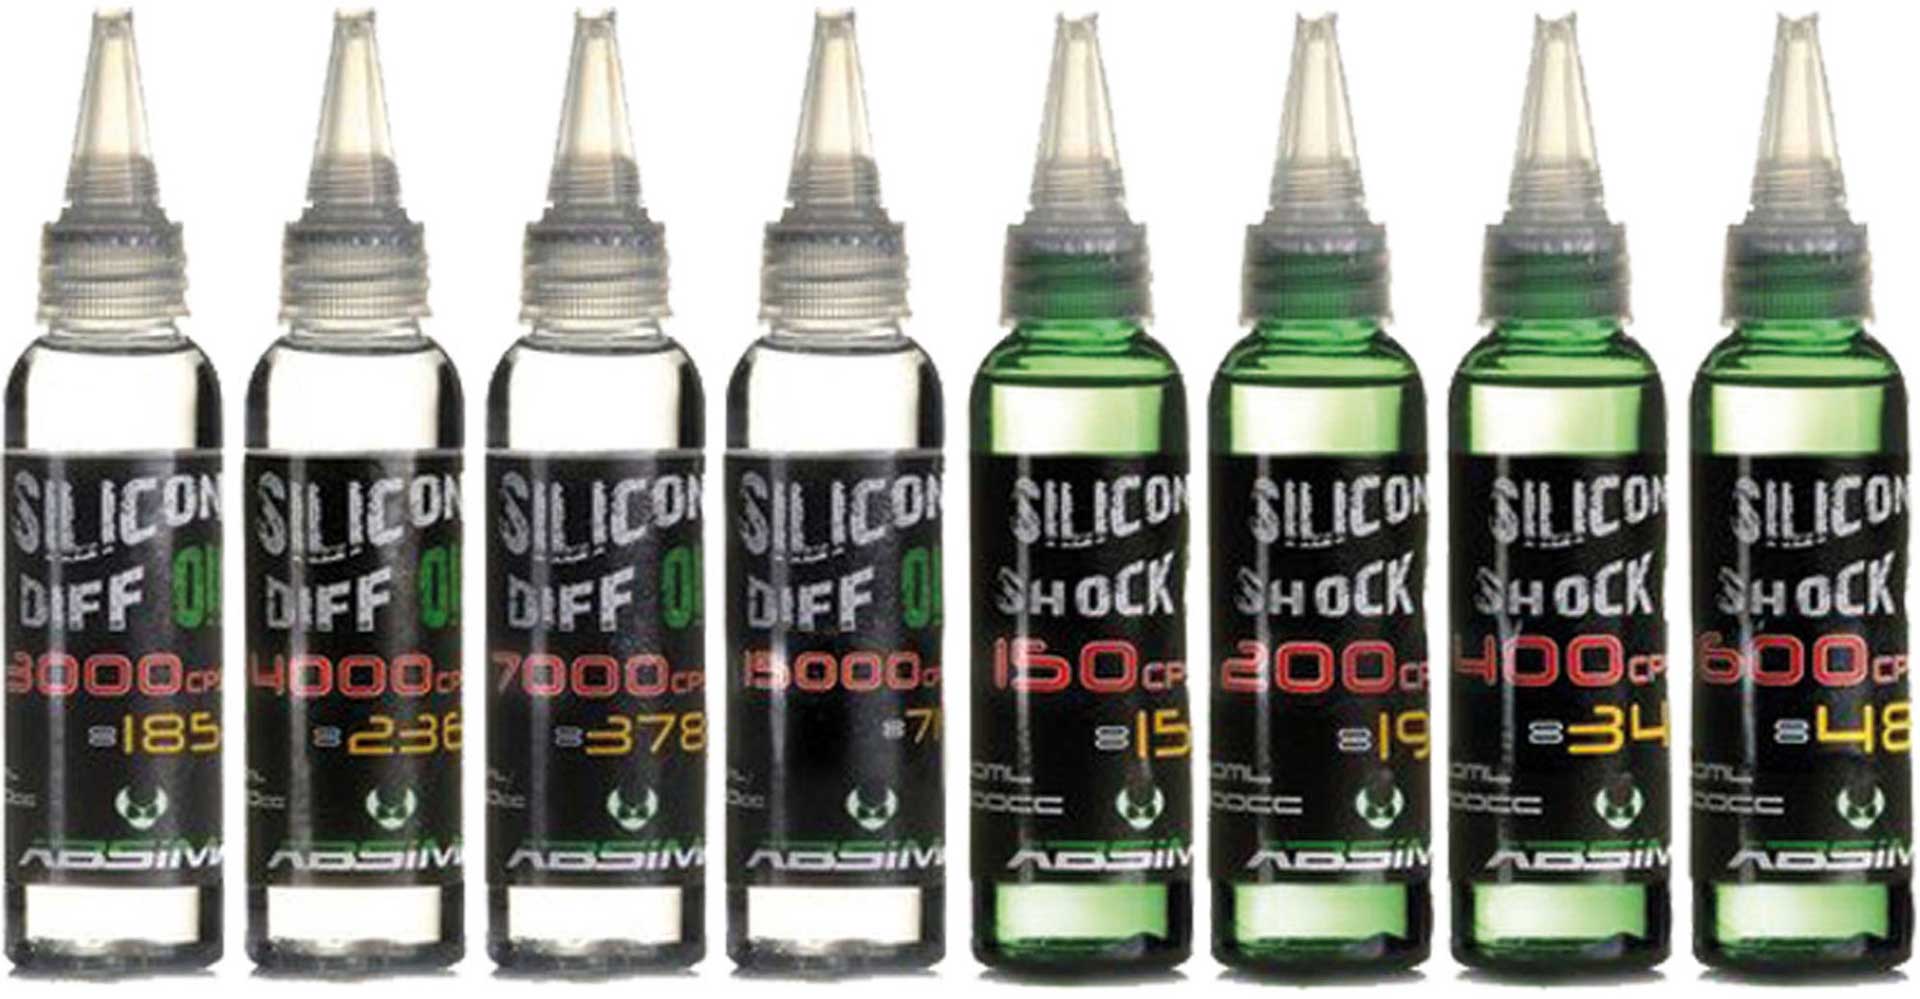 ABSIMA SILICONE DIFFERENTIAL OIL 500000CPS 60ML